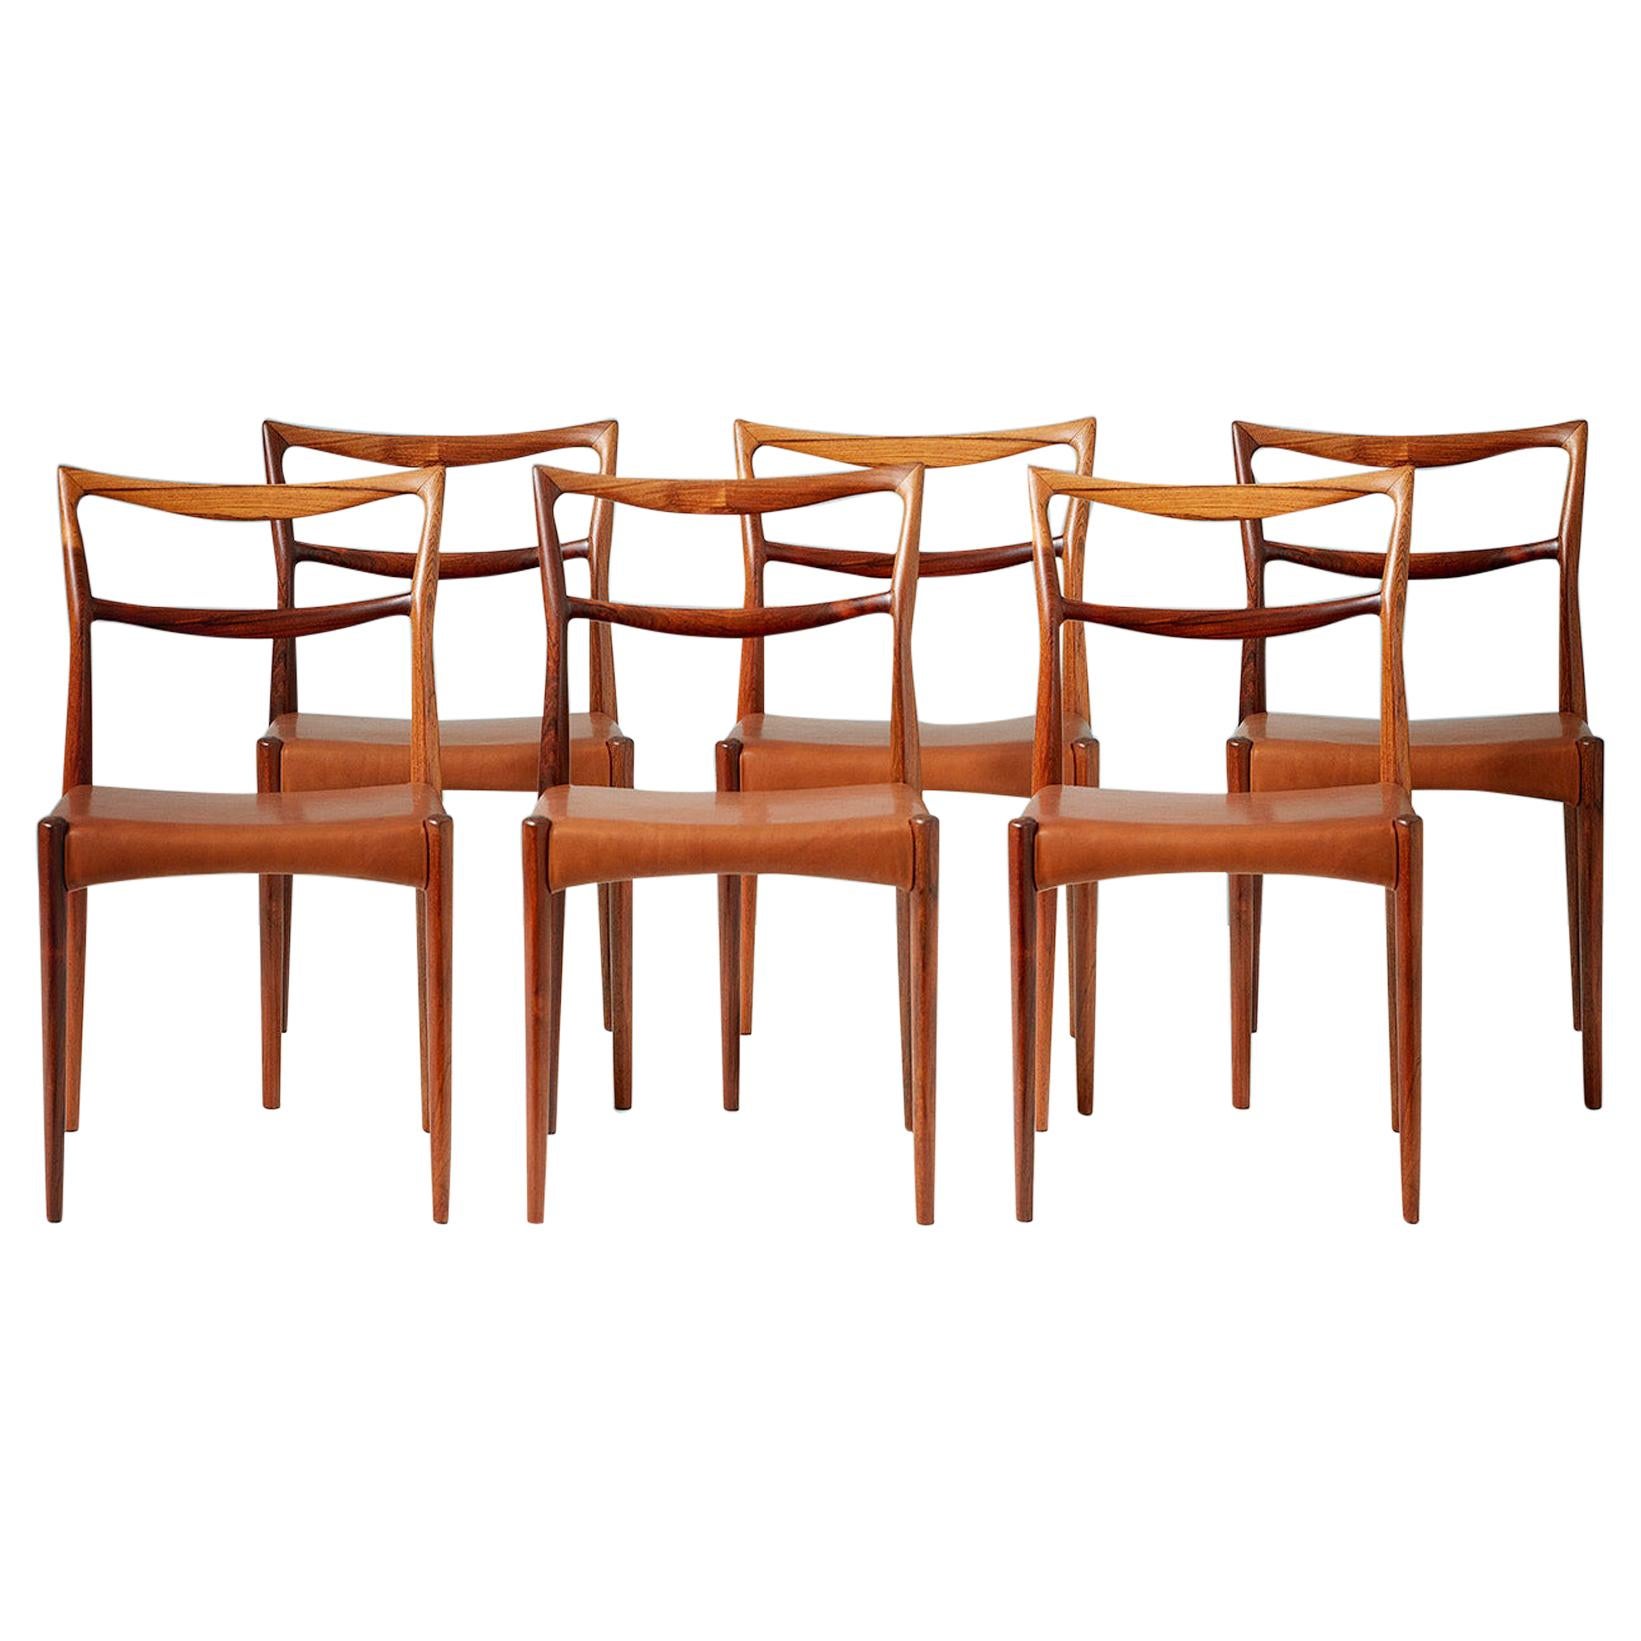 Henry W. Klein Set of 6 Rosewood Dining Chairs, circa 1960s